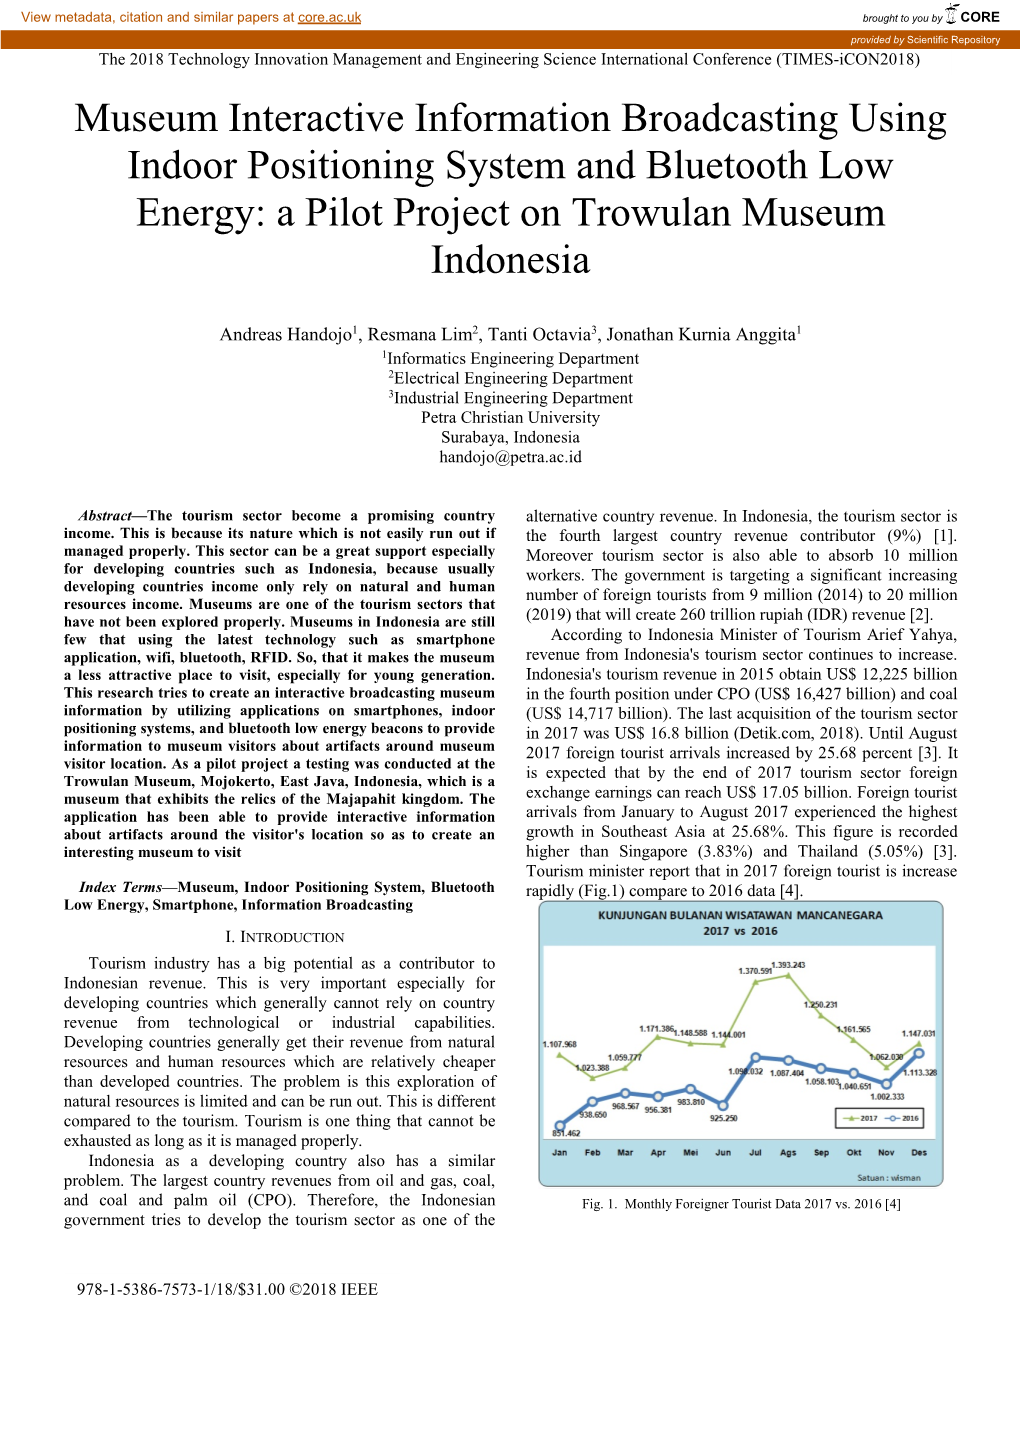 Museum Interactive Information Broadcasting Using Indoor Positioning System and Bluetooth Low Energy: a Pilot Project on Trowulan Museum Indonesia